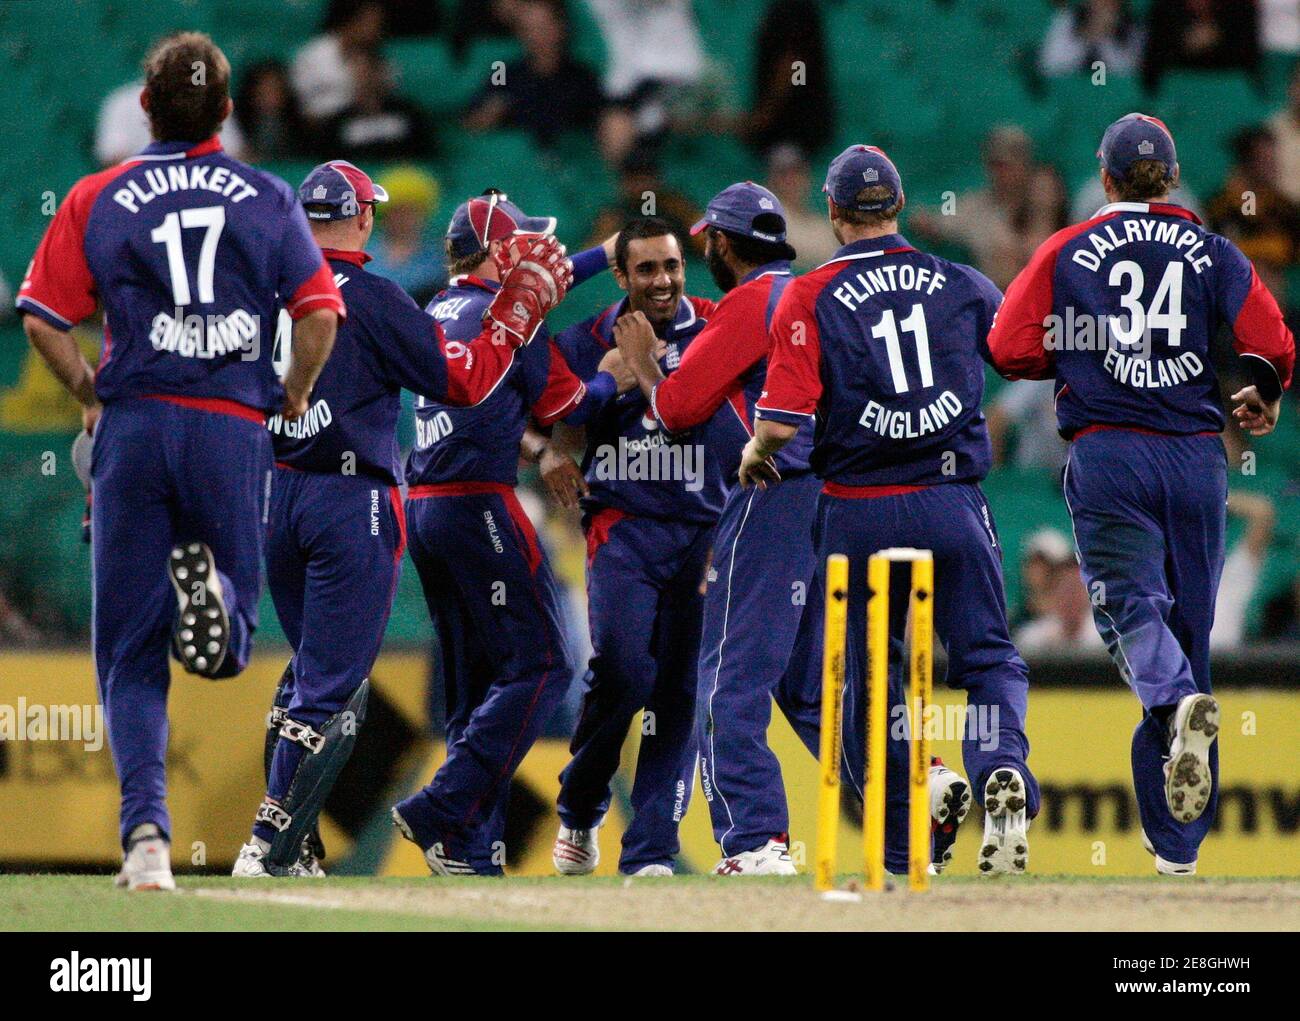 English players celebrate with team mate Ravinder Bopara (C, facing camera) after he dismissed Australia's Michael Hussey during their one-day international cricket match in Sydney February 2, 2007. REUTERS/Will Burgess (AUSTRALIA) Stock Photo